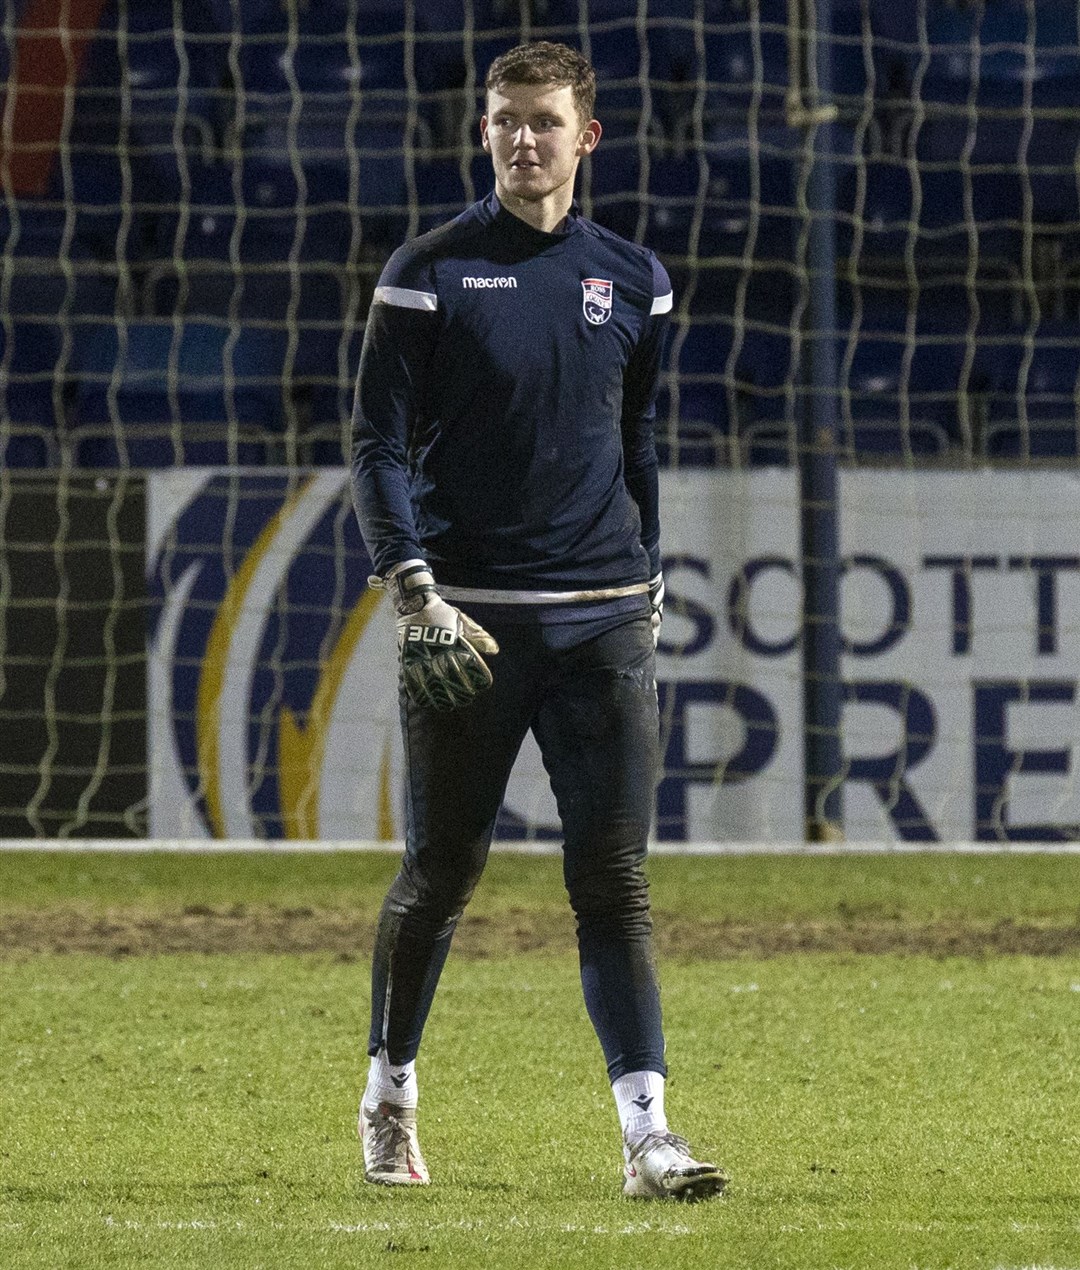 Picture - Ken Macpherson, Inverness. Ross County(1) v Motherwell(2). 27.01.21. New loan signing Ross County 'keeper Joe Hilton was on the bench.